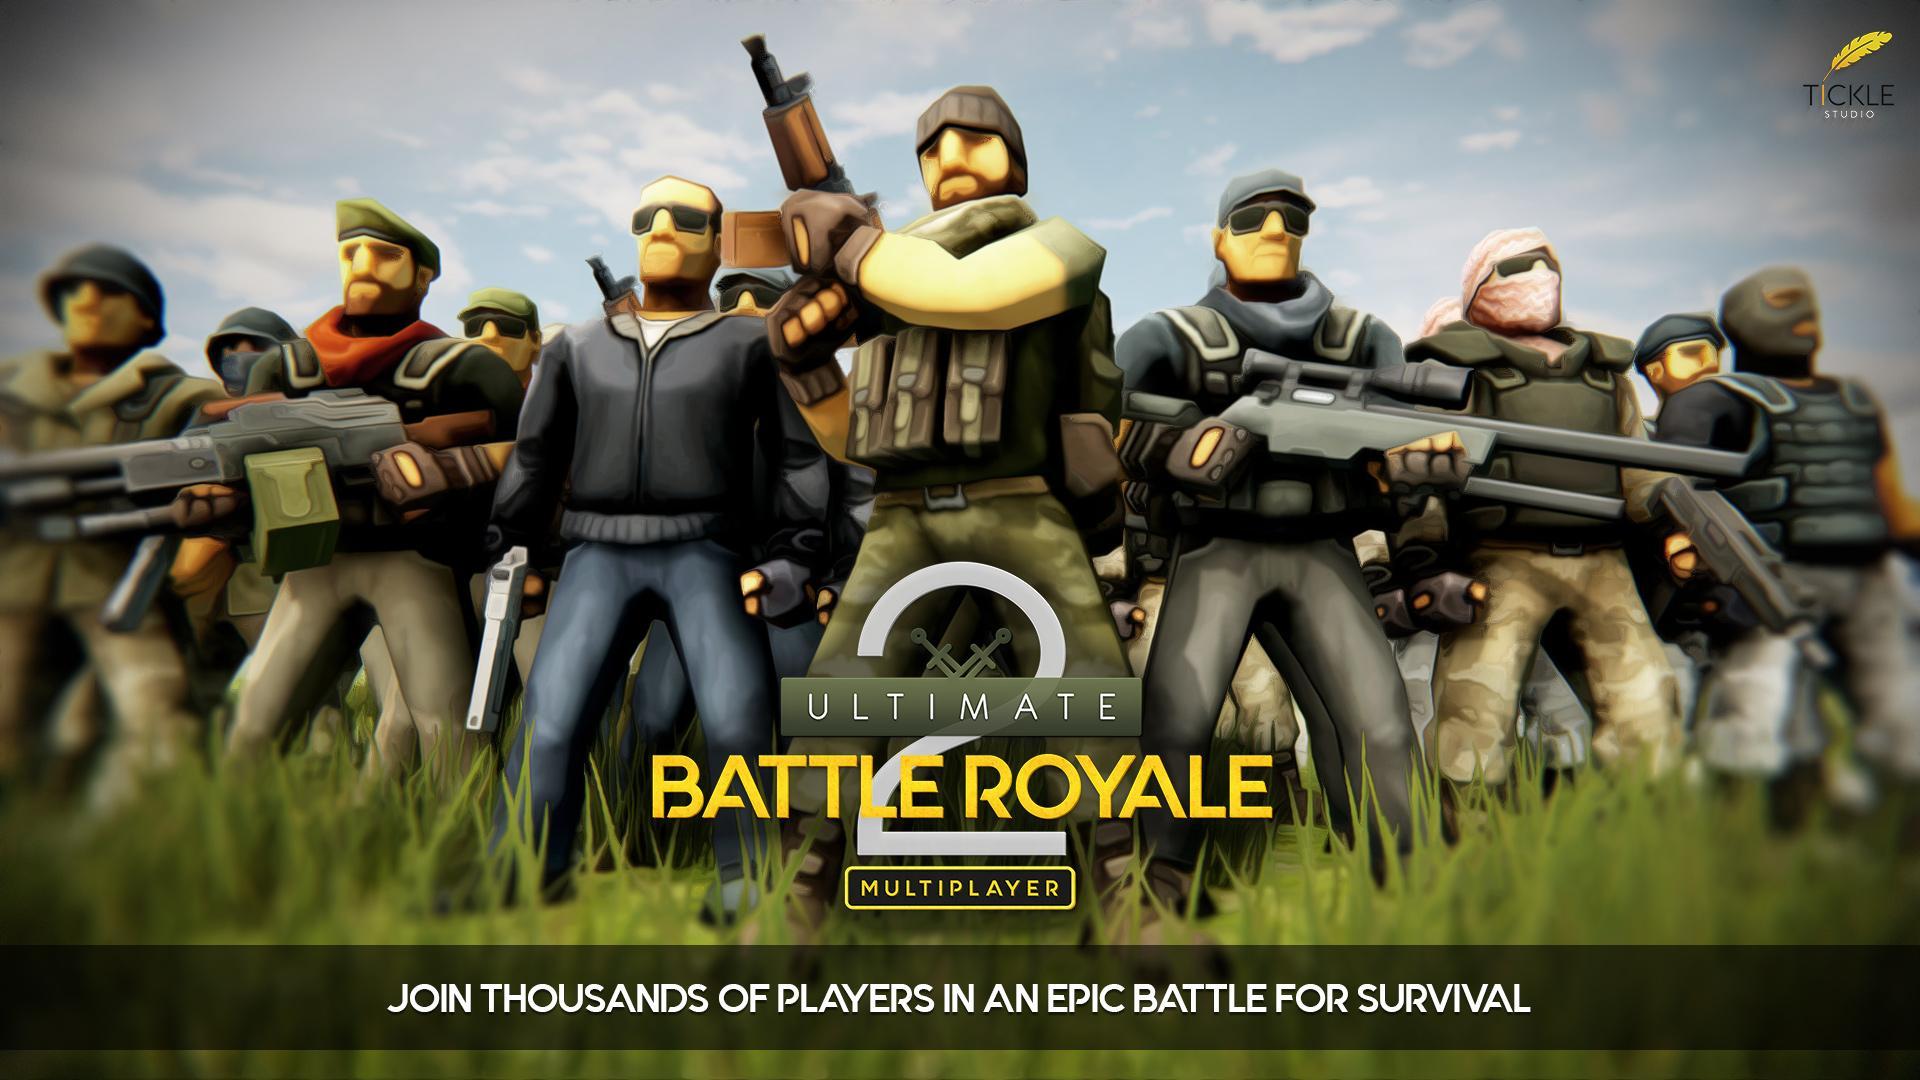 Ultimate Battle Royale 2 Pvp For Android Apk Download - jogos battle royale roblox